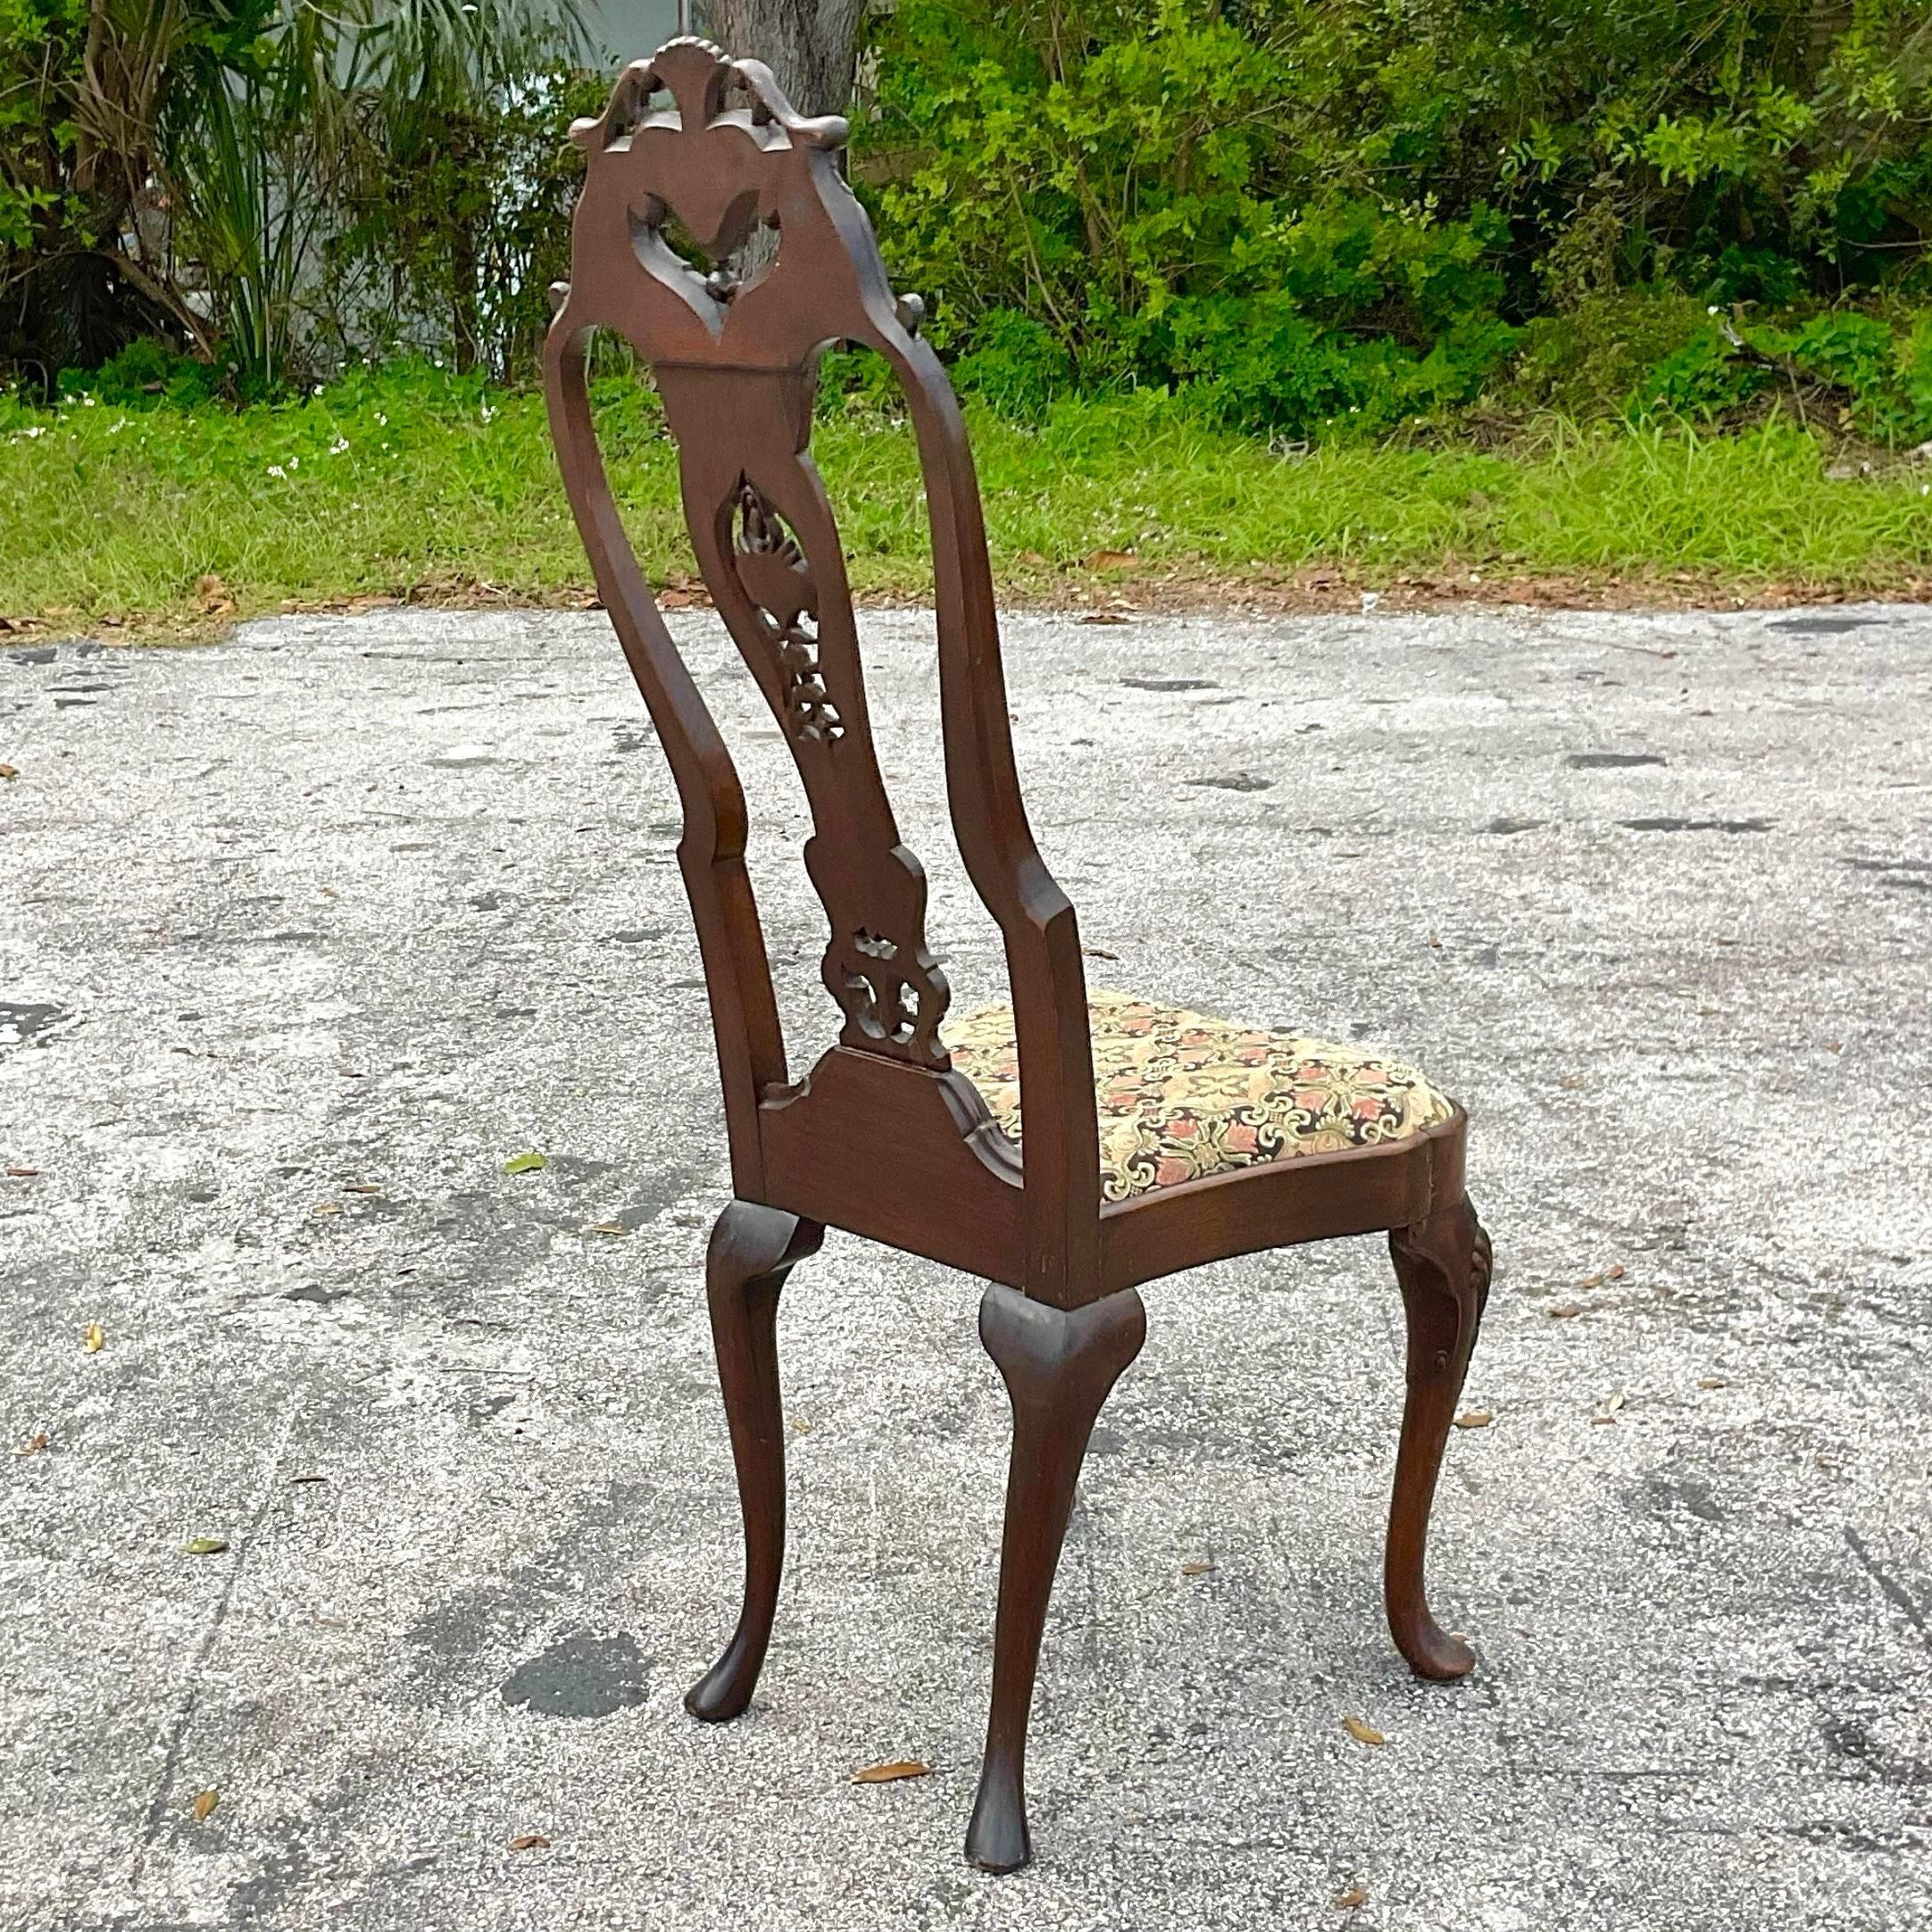 Incredible hand carved vintage chair, the splat and stile feature intricate fish scale carvings. The ornate cresting rail is adorned with shell mimicked in the apron. Features a slip seat. Incredible craftsmanship and age, immediately age elegance